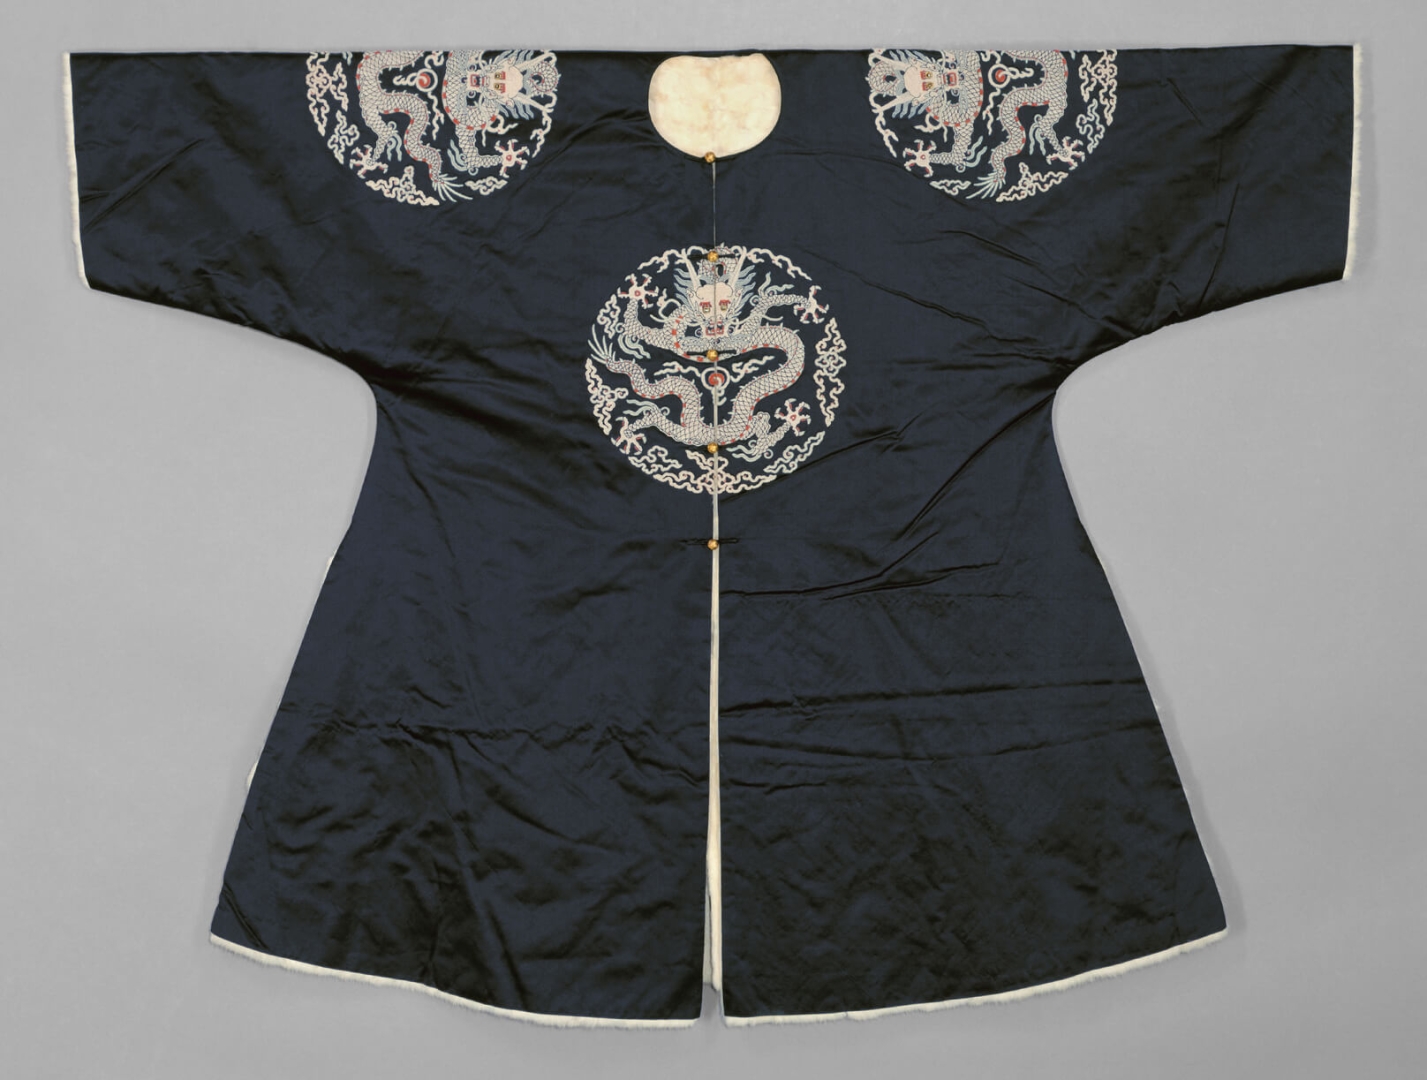 Dark Blue Satin Ermine-lined <br />
Surcoat with Four Dragon <br />
Roundels in Seed-pearl Embroidery